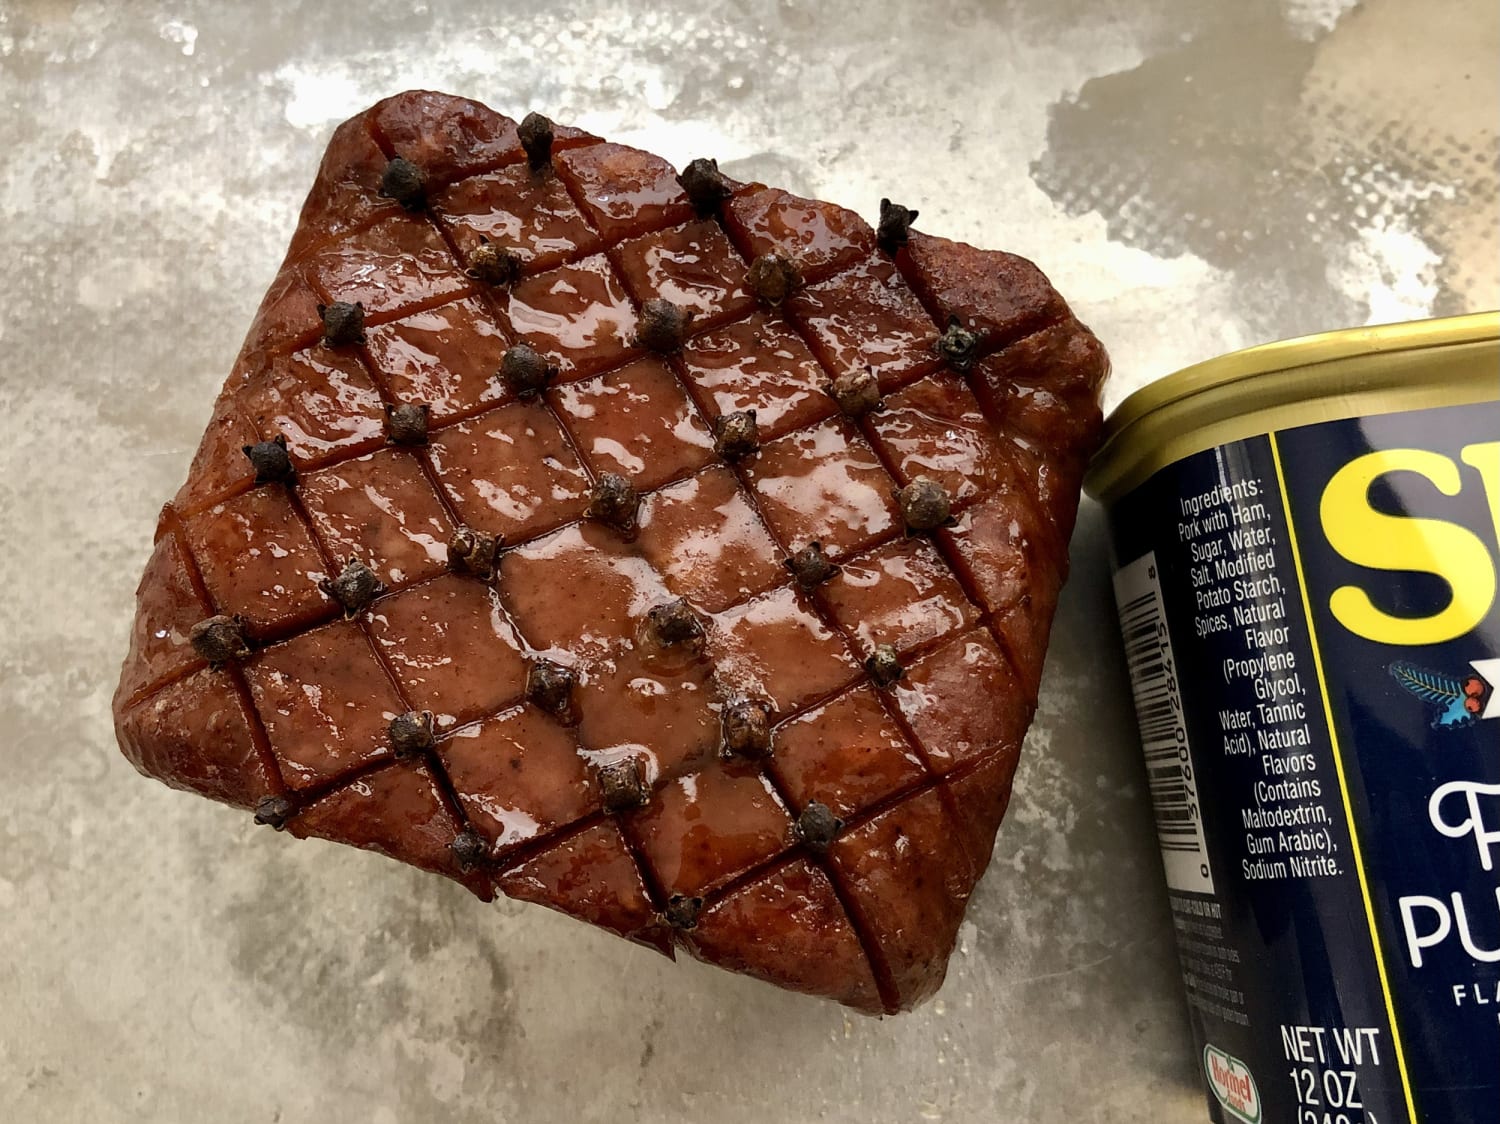 Figgy Pudding Spam Review: I ate it so you don't have to 